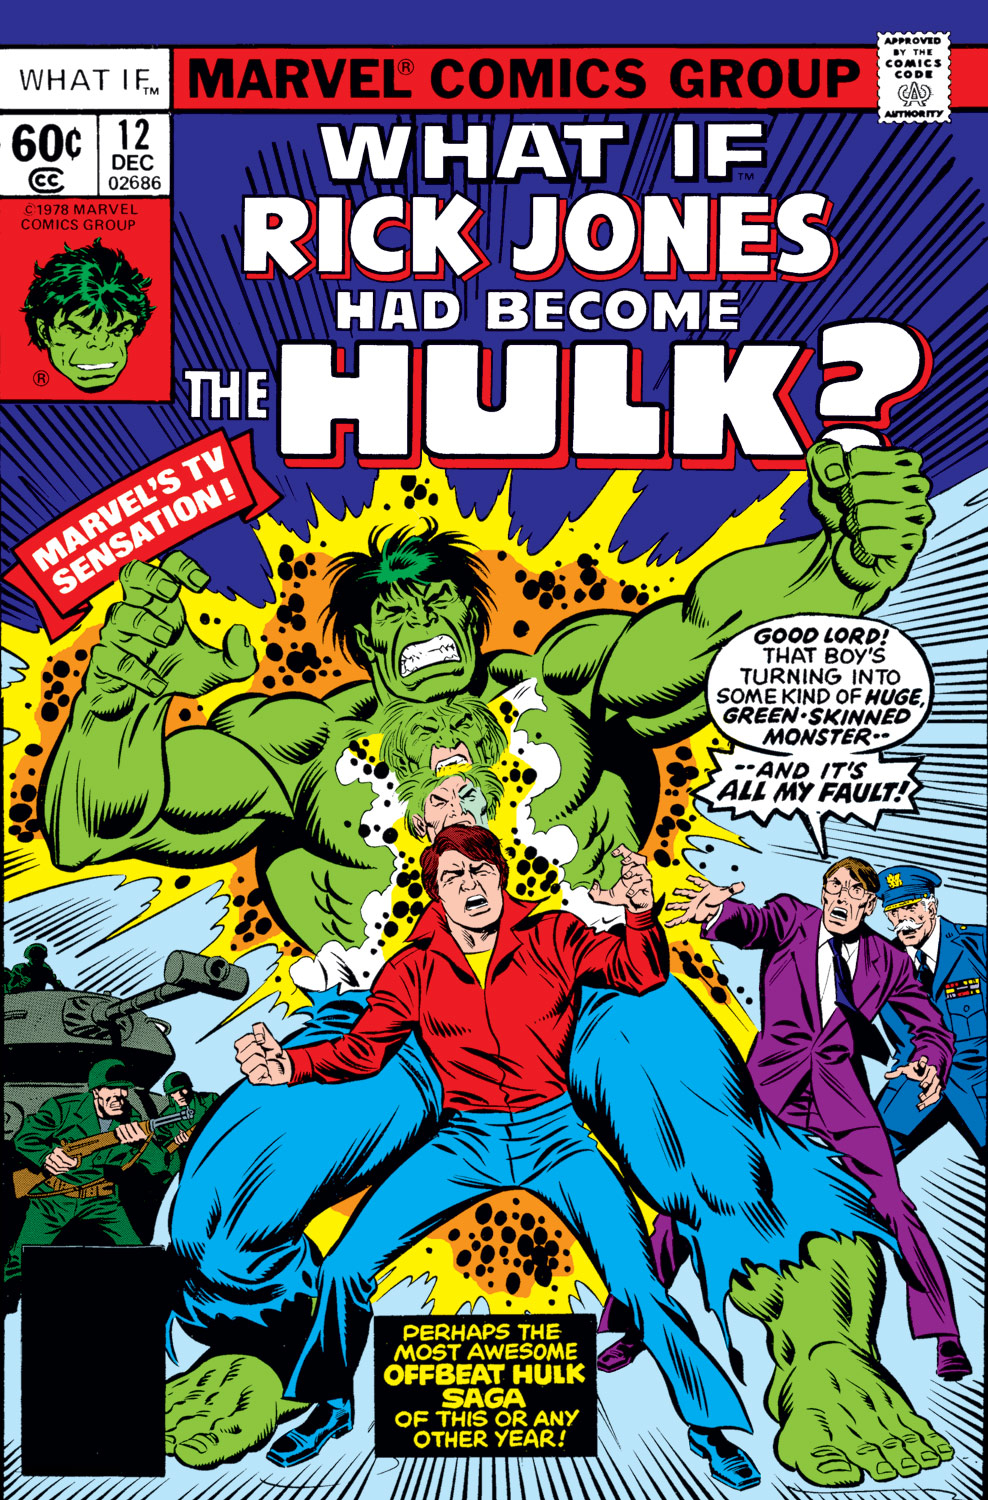 Read online What If? (1977) comic -  Issue #12 - Rick Jones had become the Hulk - 1